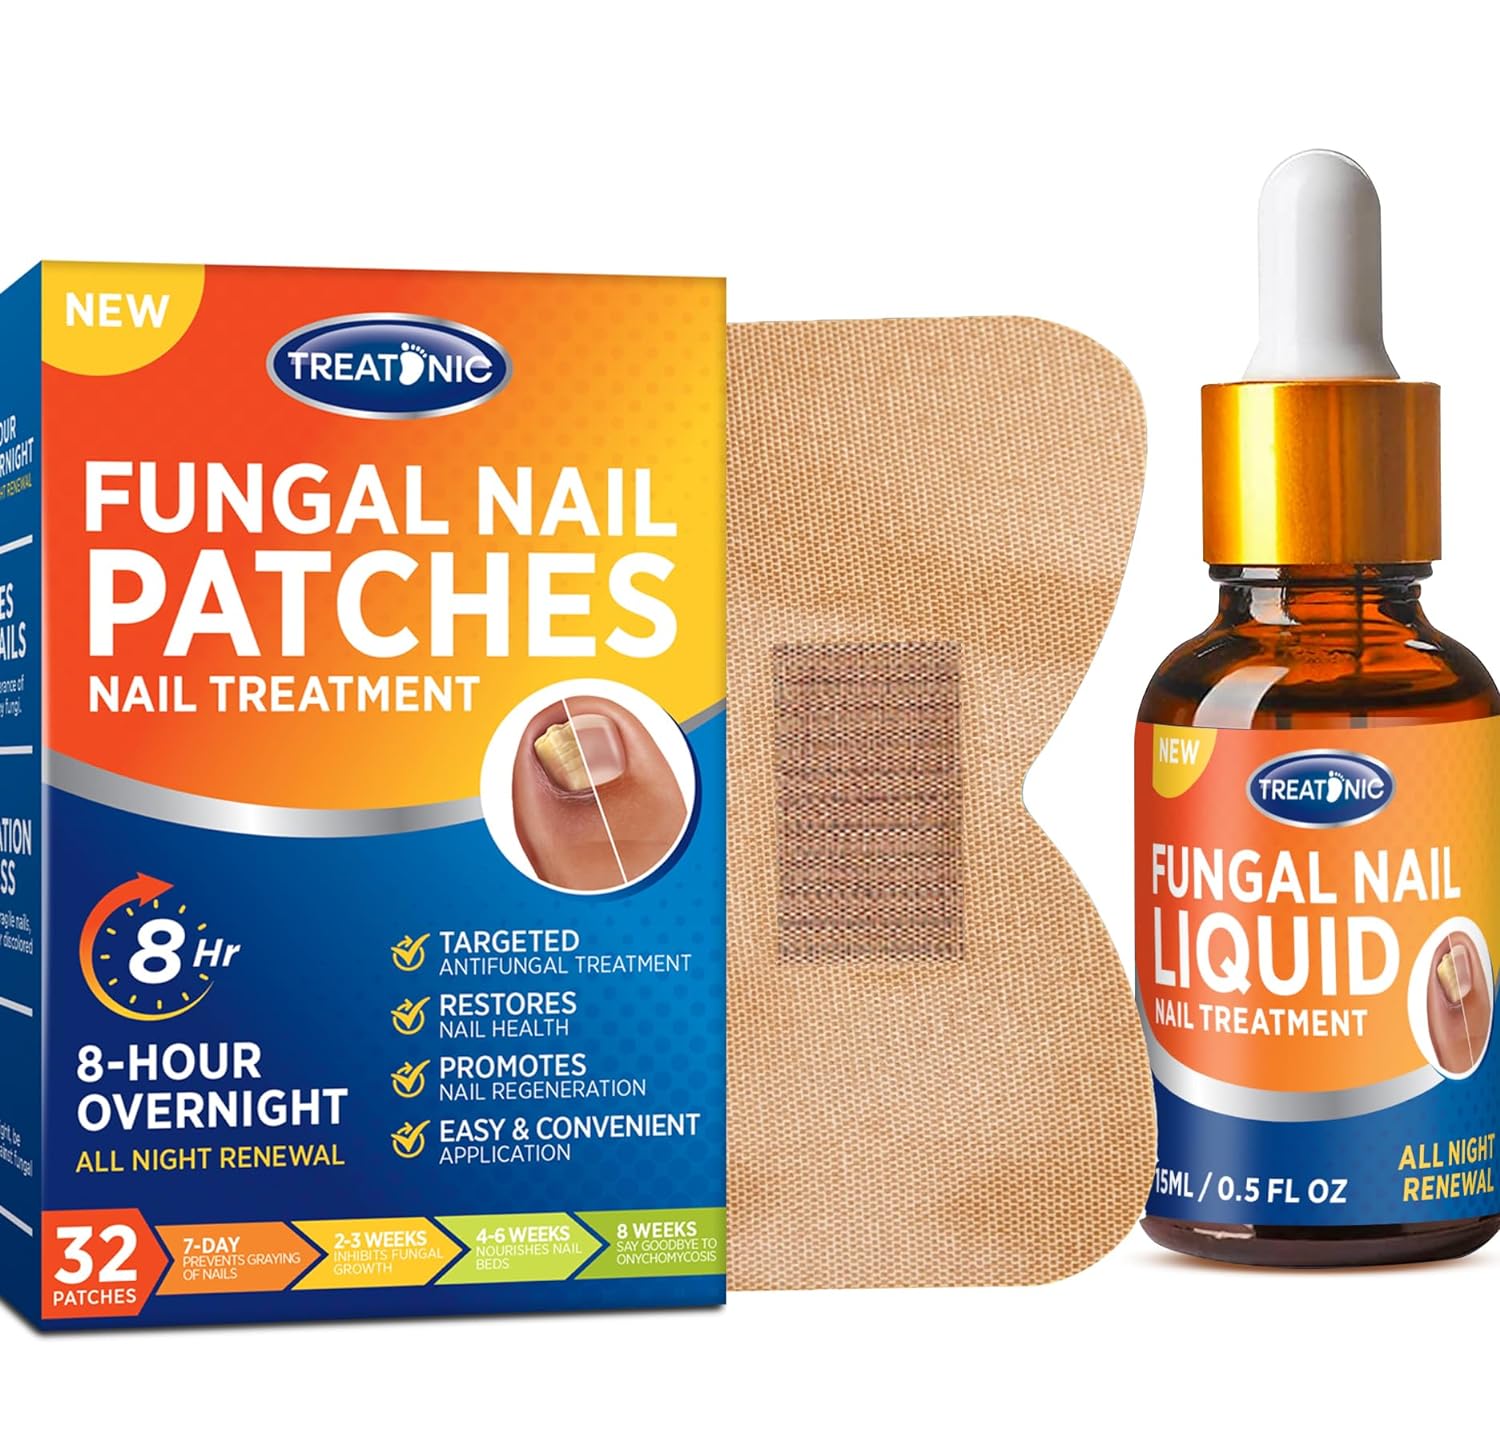 VigorWell Nail Repair Patches & Nail Fungus Treatment for Toenail Liquid Set Solution for Restoring Damaged Nails Overnight Toenail Fungus Treatment Extra Strength with 8-Hour (32Patches + 15mL)